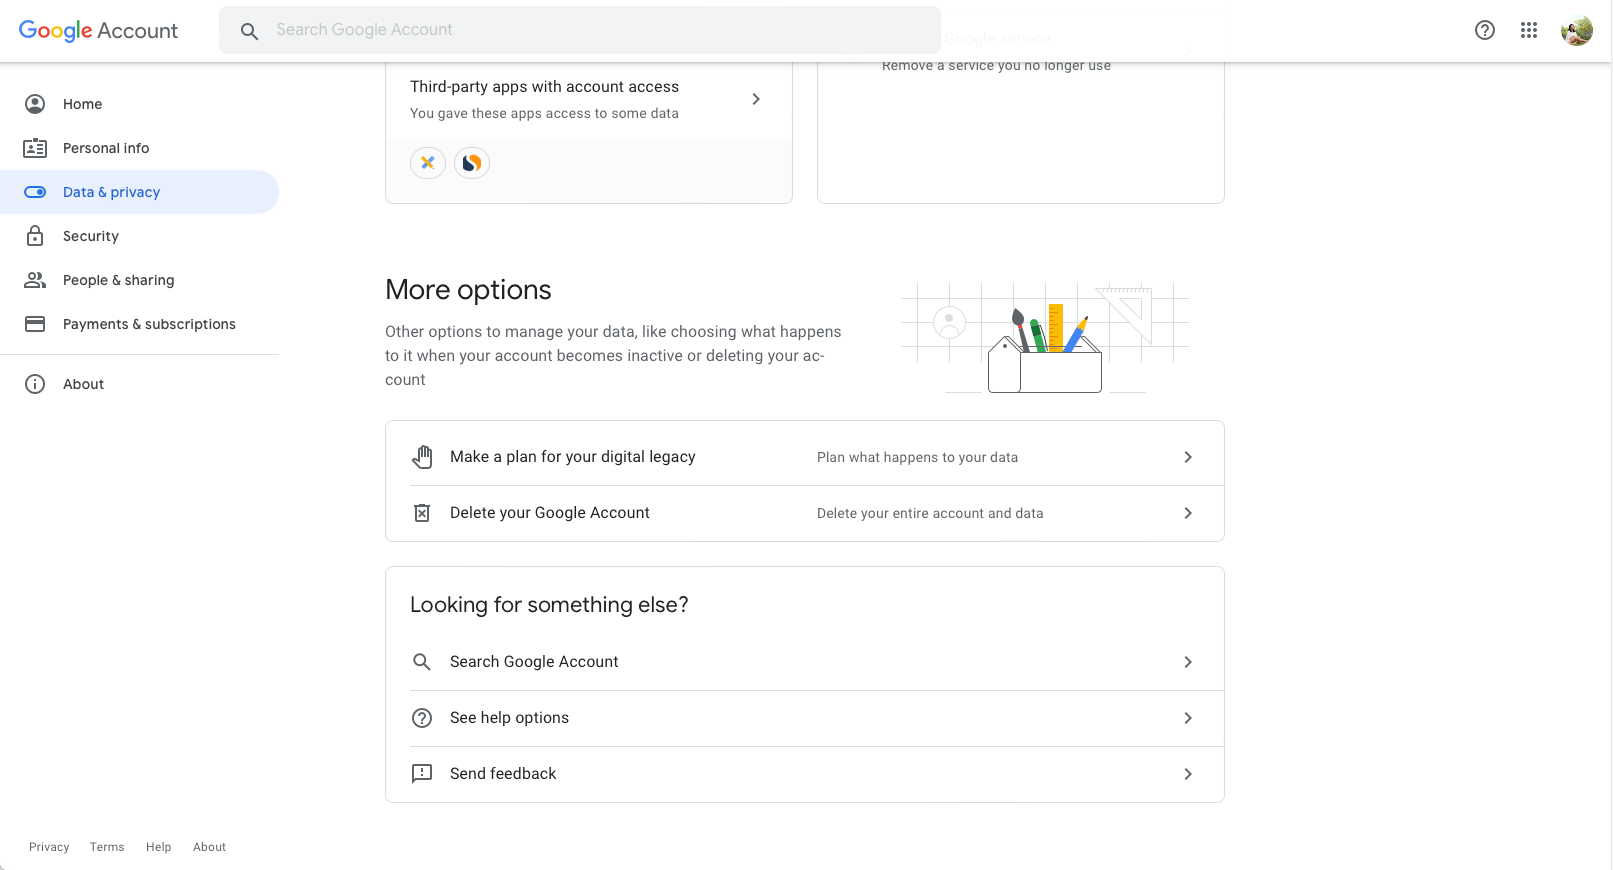 Google Account Settings - Make a Plan for your Digital Legacy